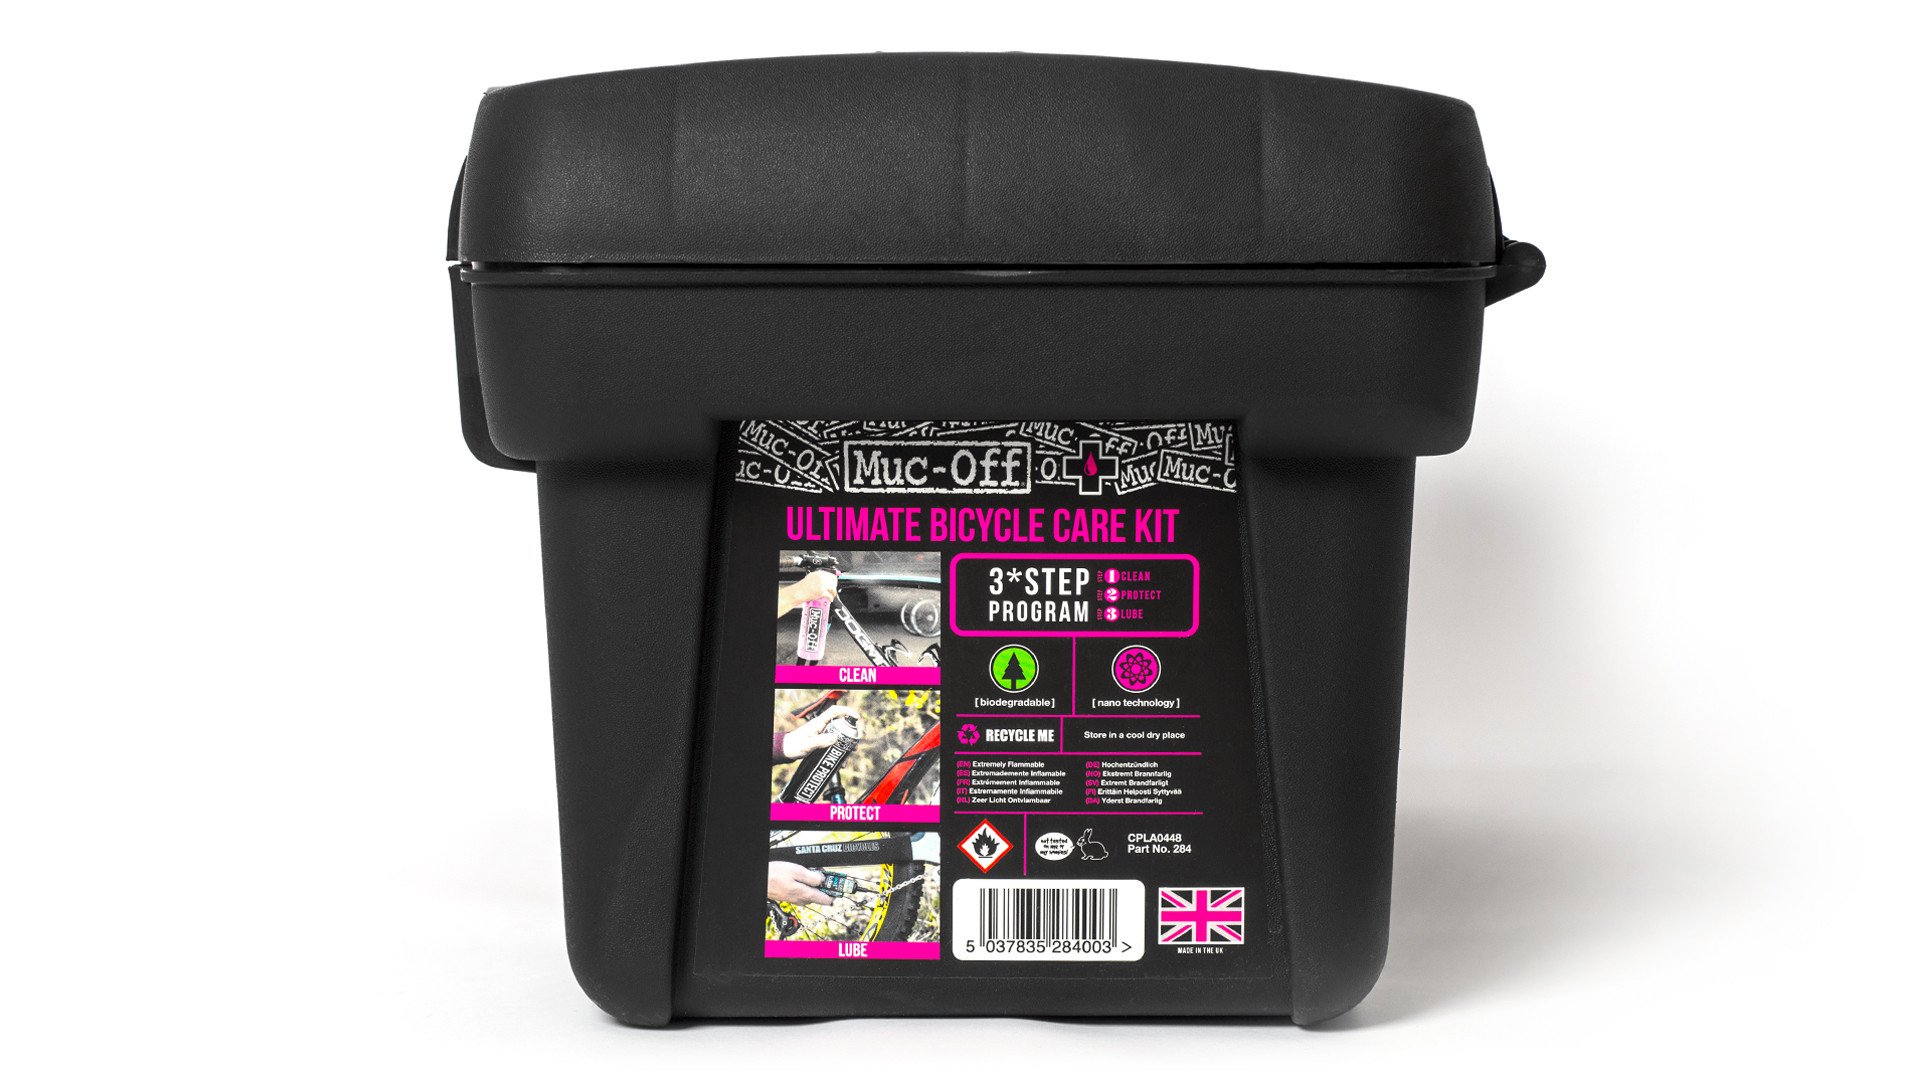 Muc-Off Cykelvårdskit, Ultimate Bicycle Care Kit